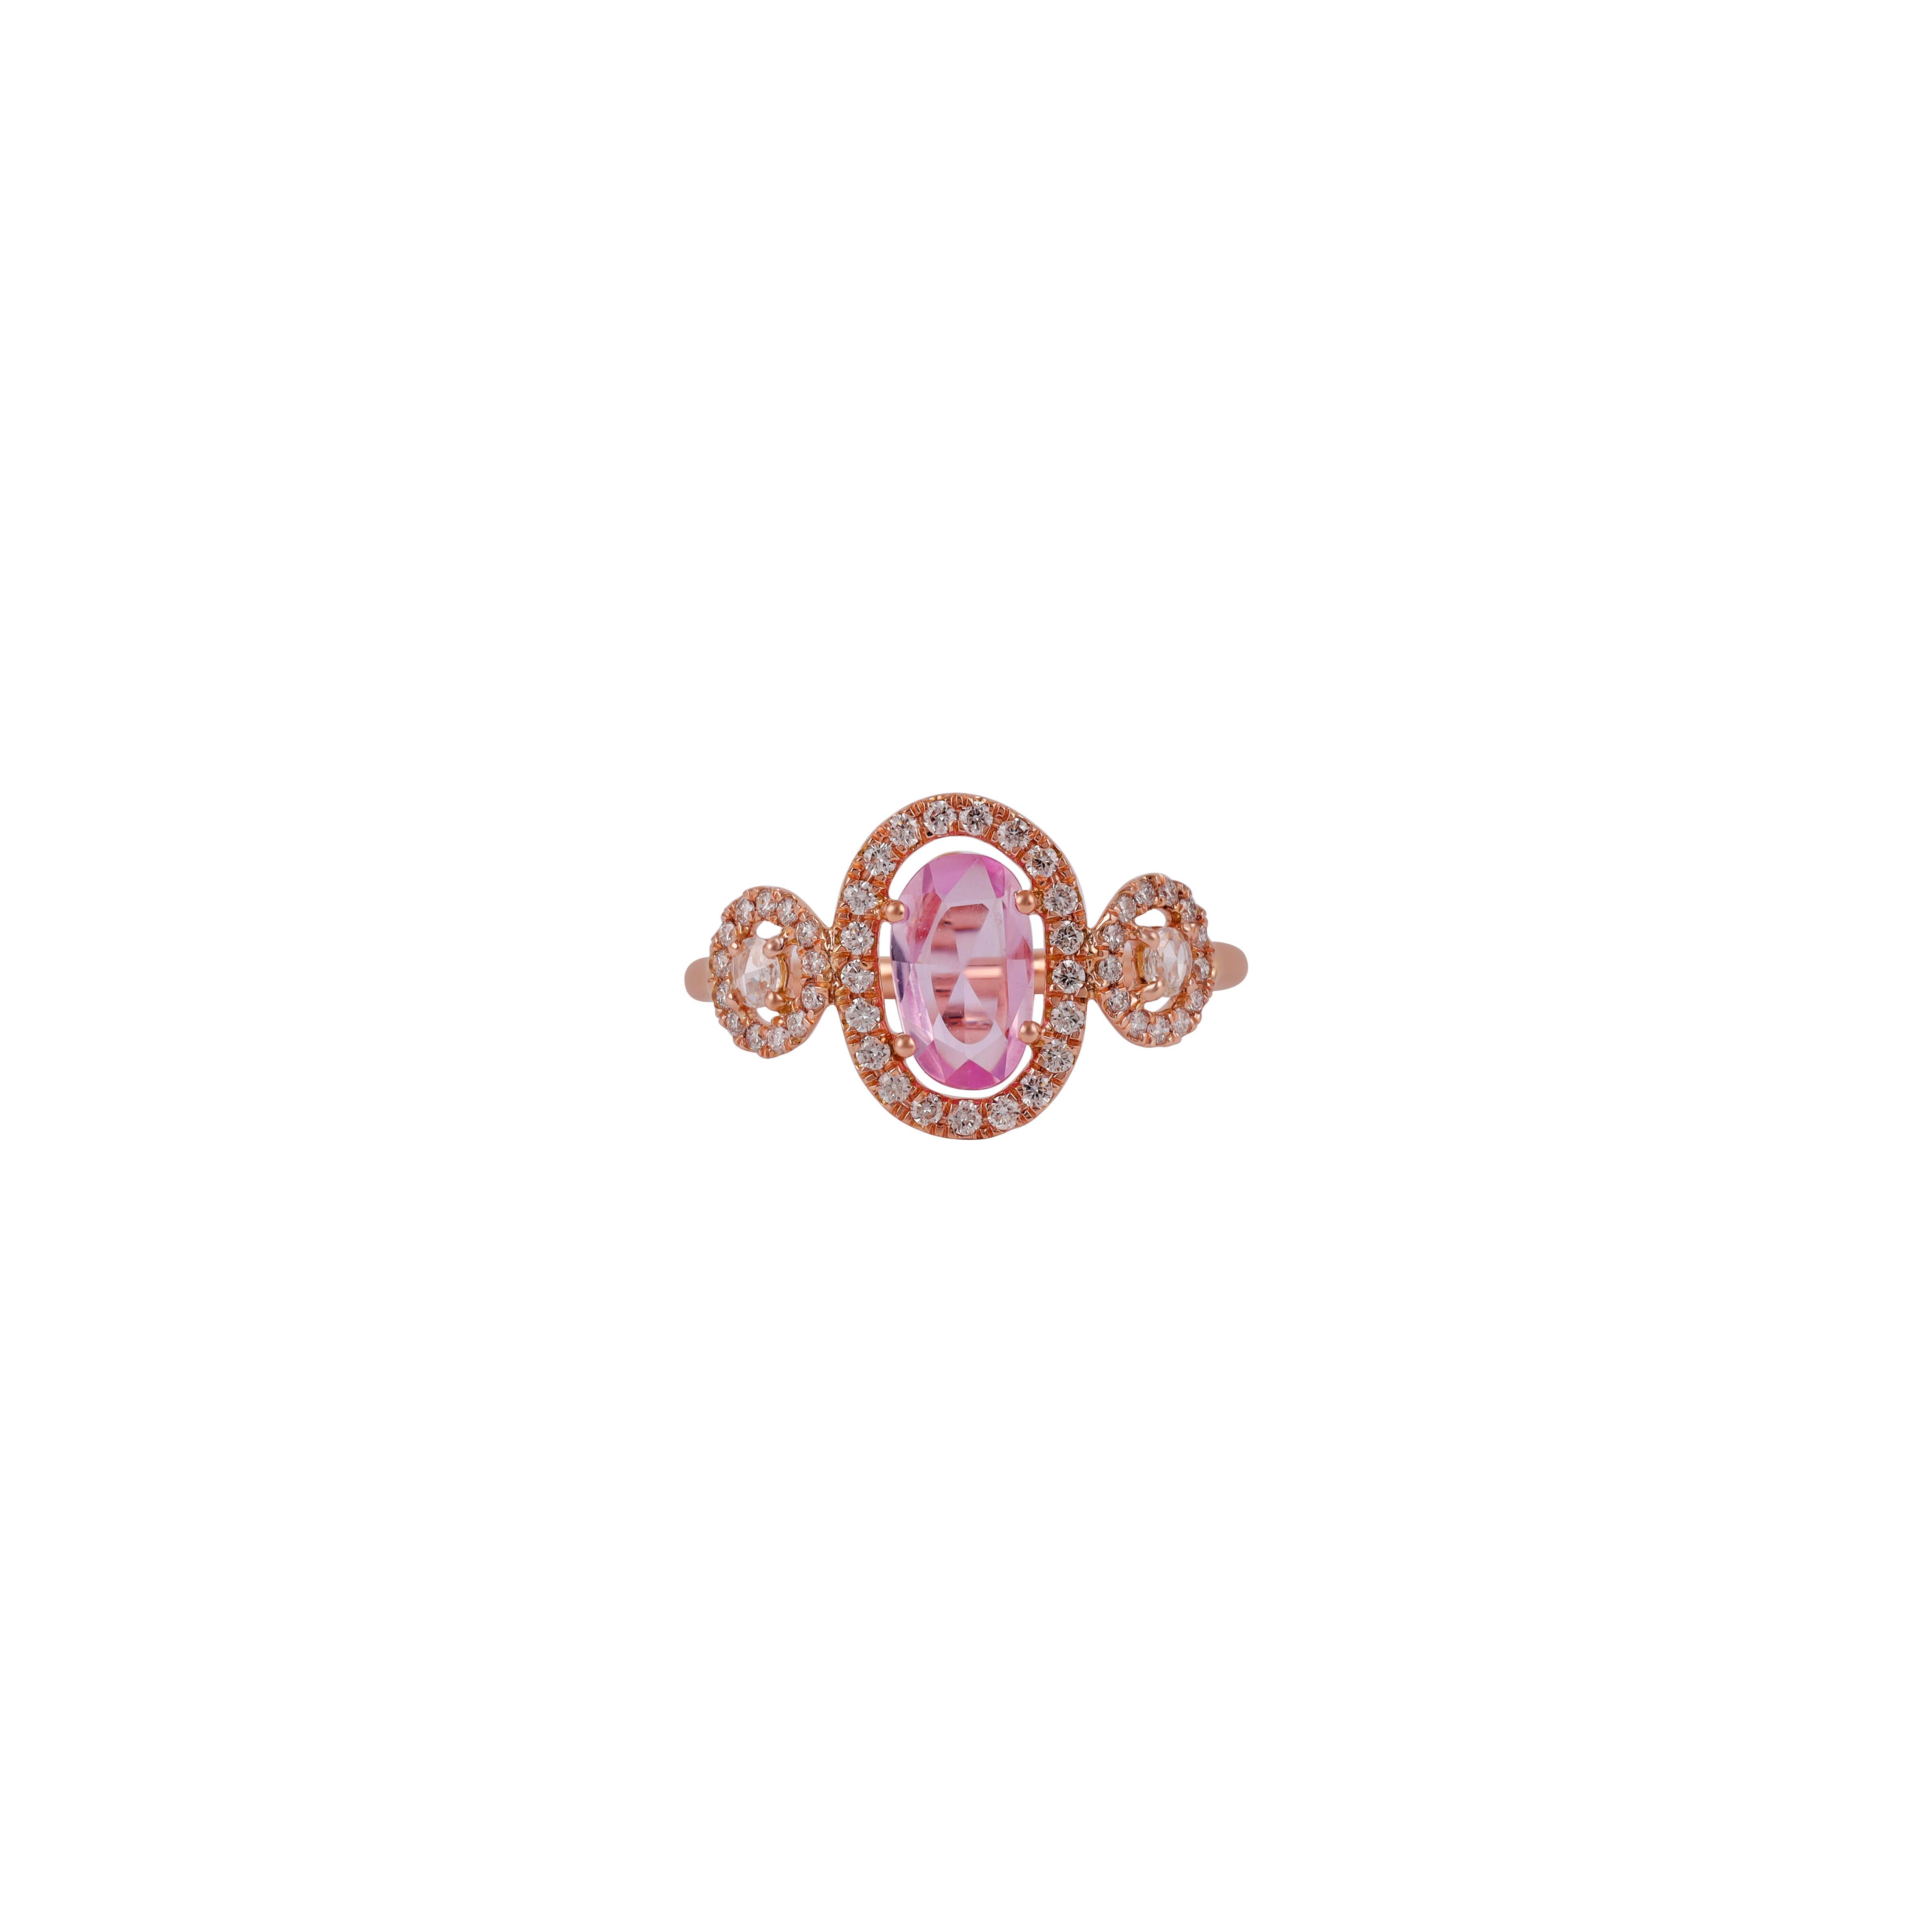 Pink Sapphire surrounded by brilliant round cut Diamond Ring 
1 Uneven shape Sapphire 0.83 CTS
 Both side 2  Rose cut  Diamonds 0.07 CTS
47 Round brilliant cut diamonds 0.34 CTS
18 k Rose gold mounting 2.08 GMS

Custom Services
Resizing is